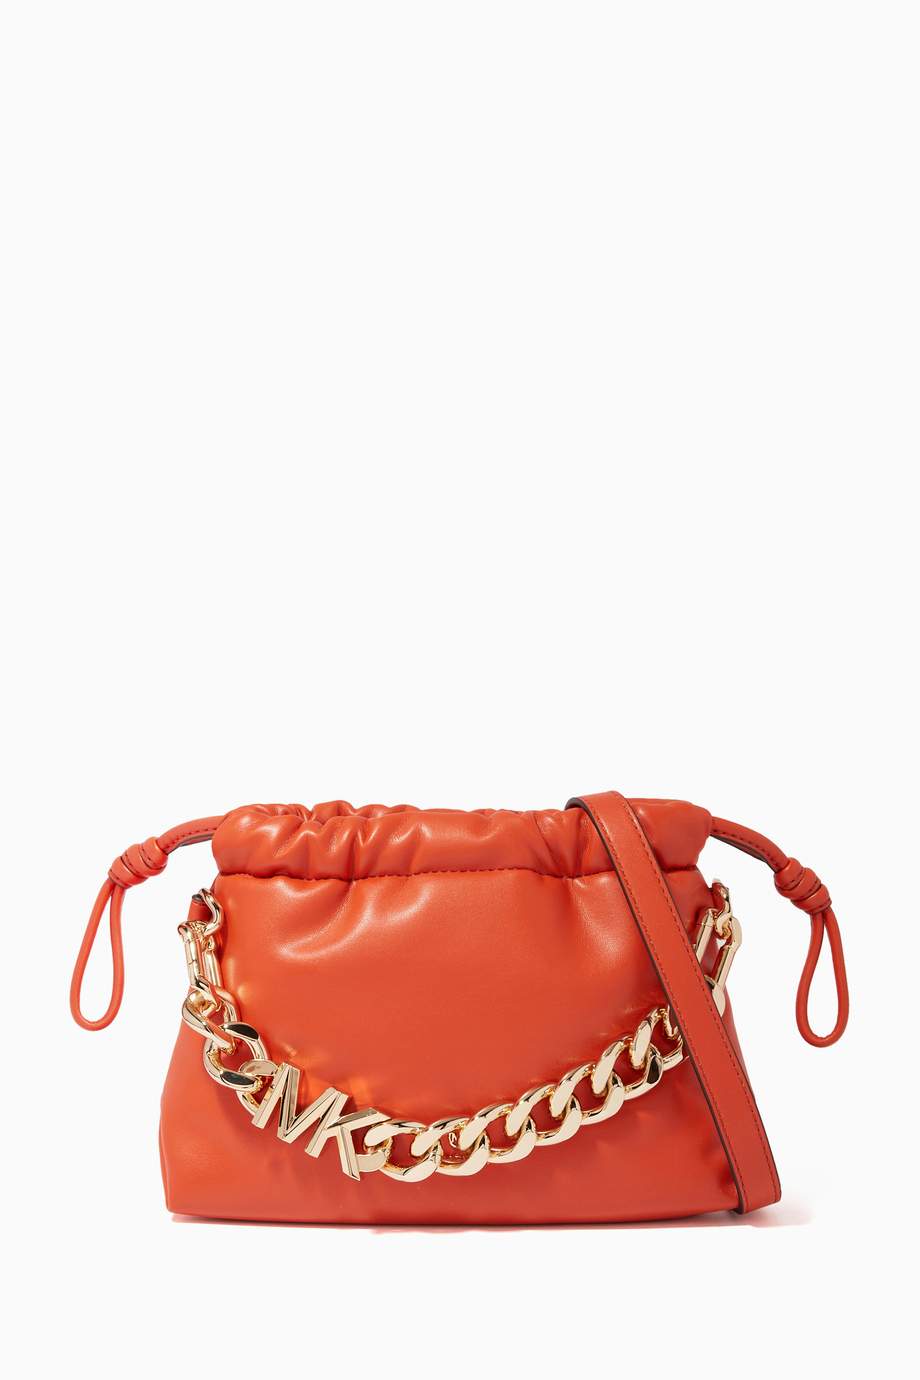 Shop Michael Kors Orange Extra Small Lina Crossbody Bag in Faux Leather for Women | Ounass UAE